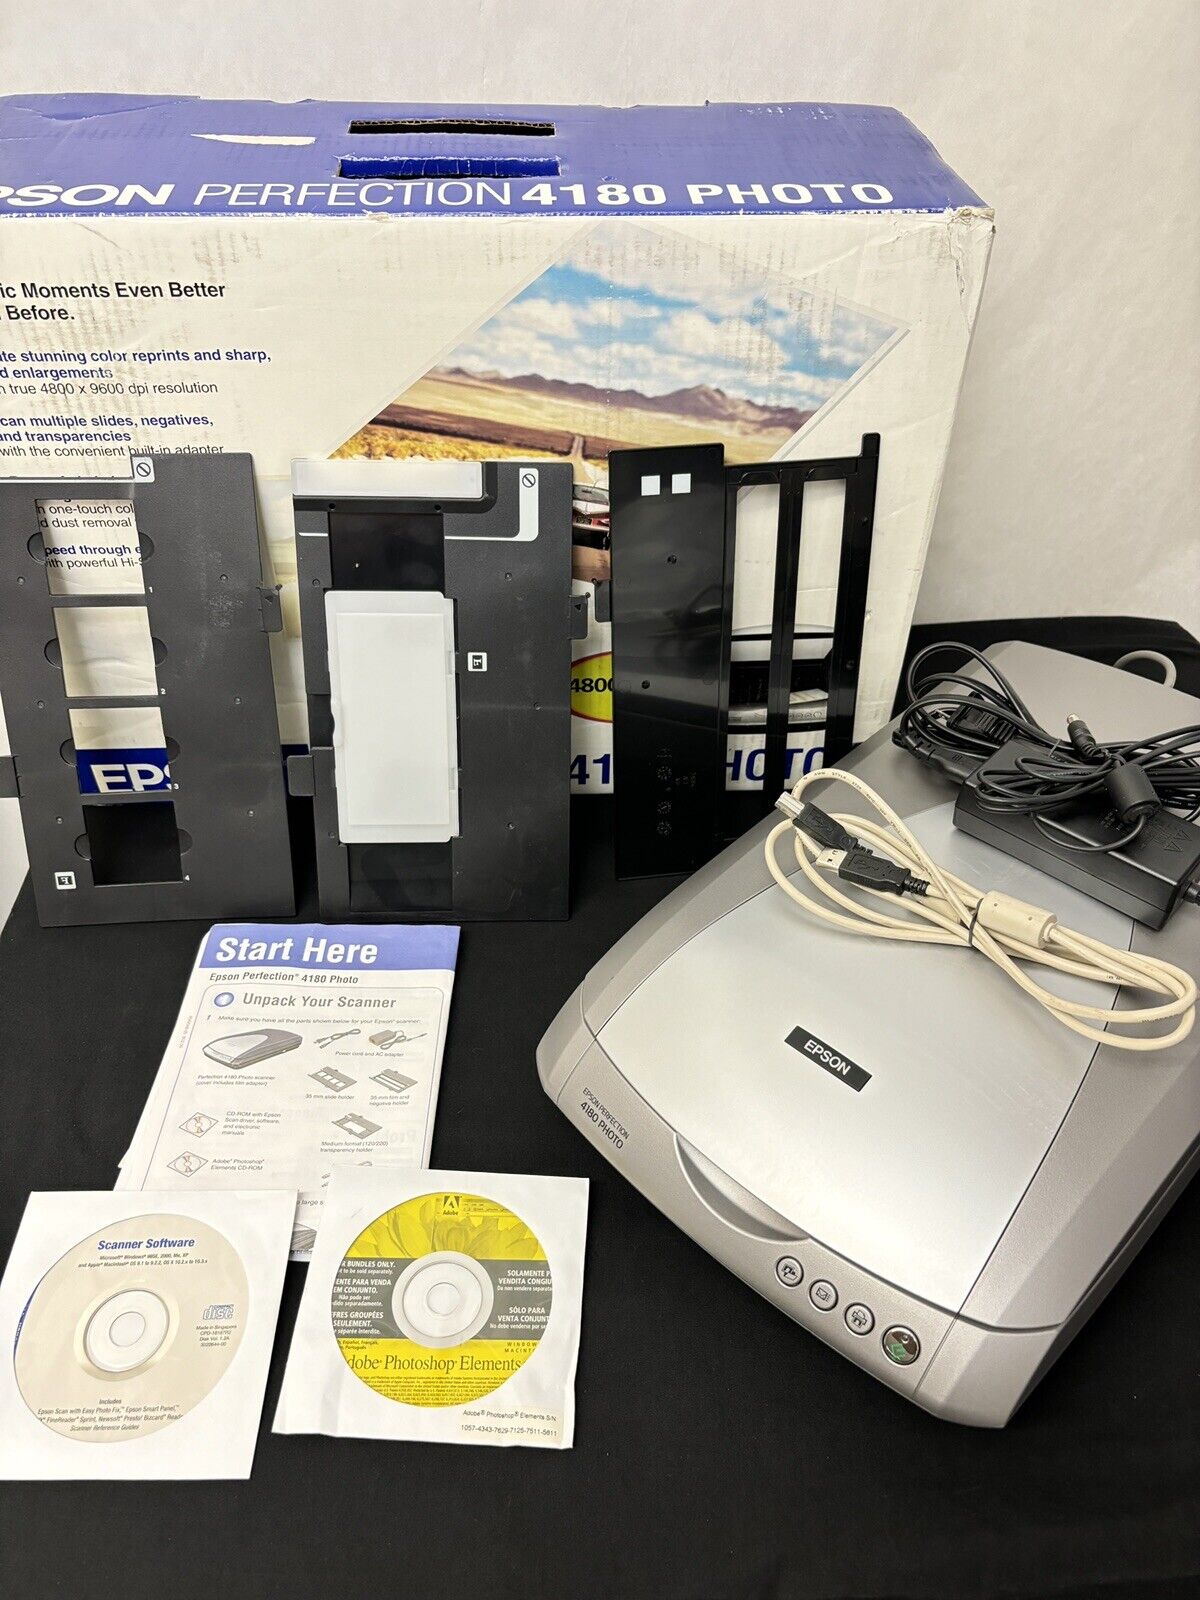 Epson Perfection 4180 Photo Flatbed Scanner with Software and Instructions